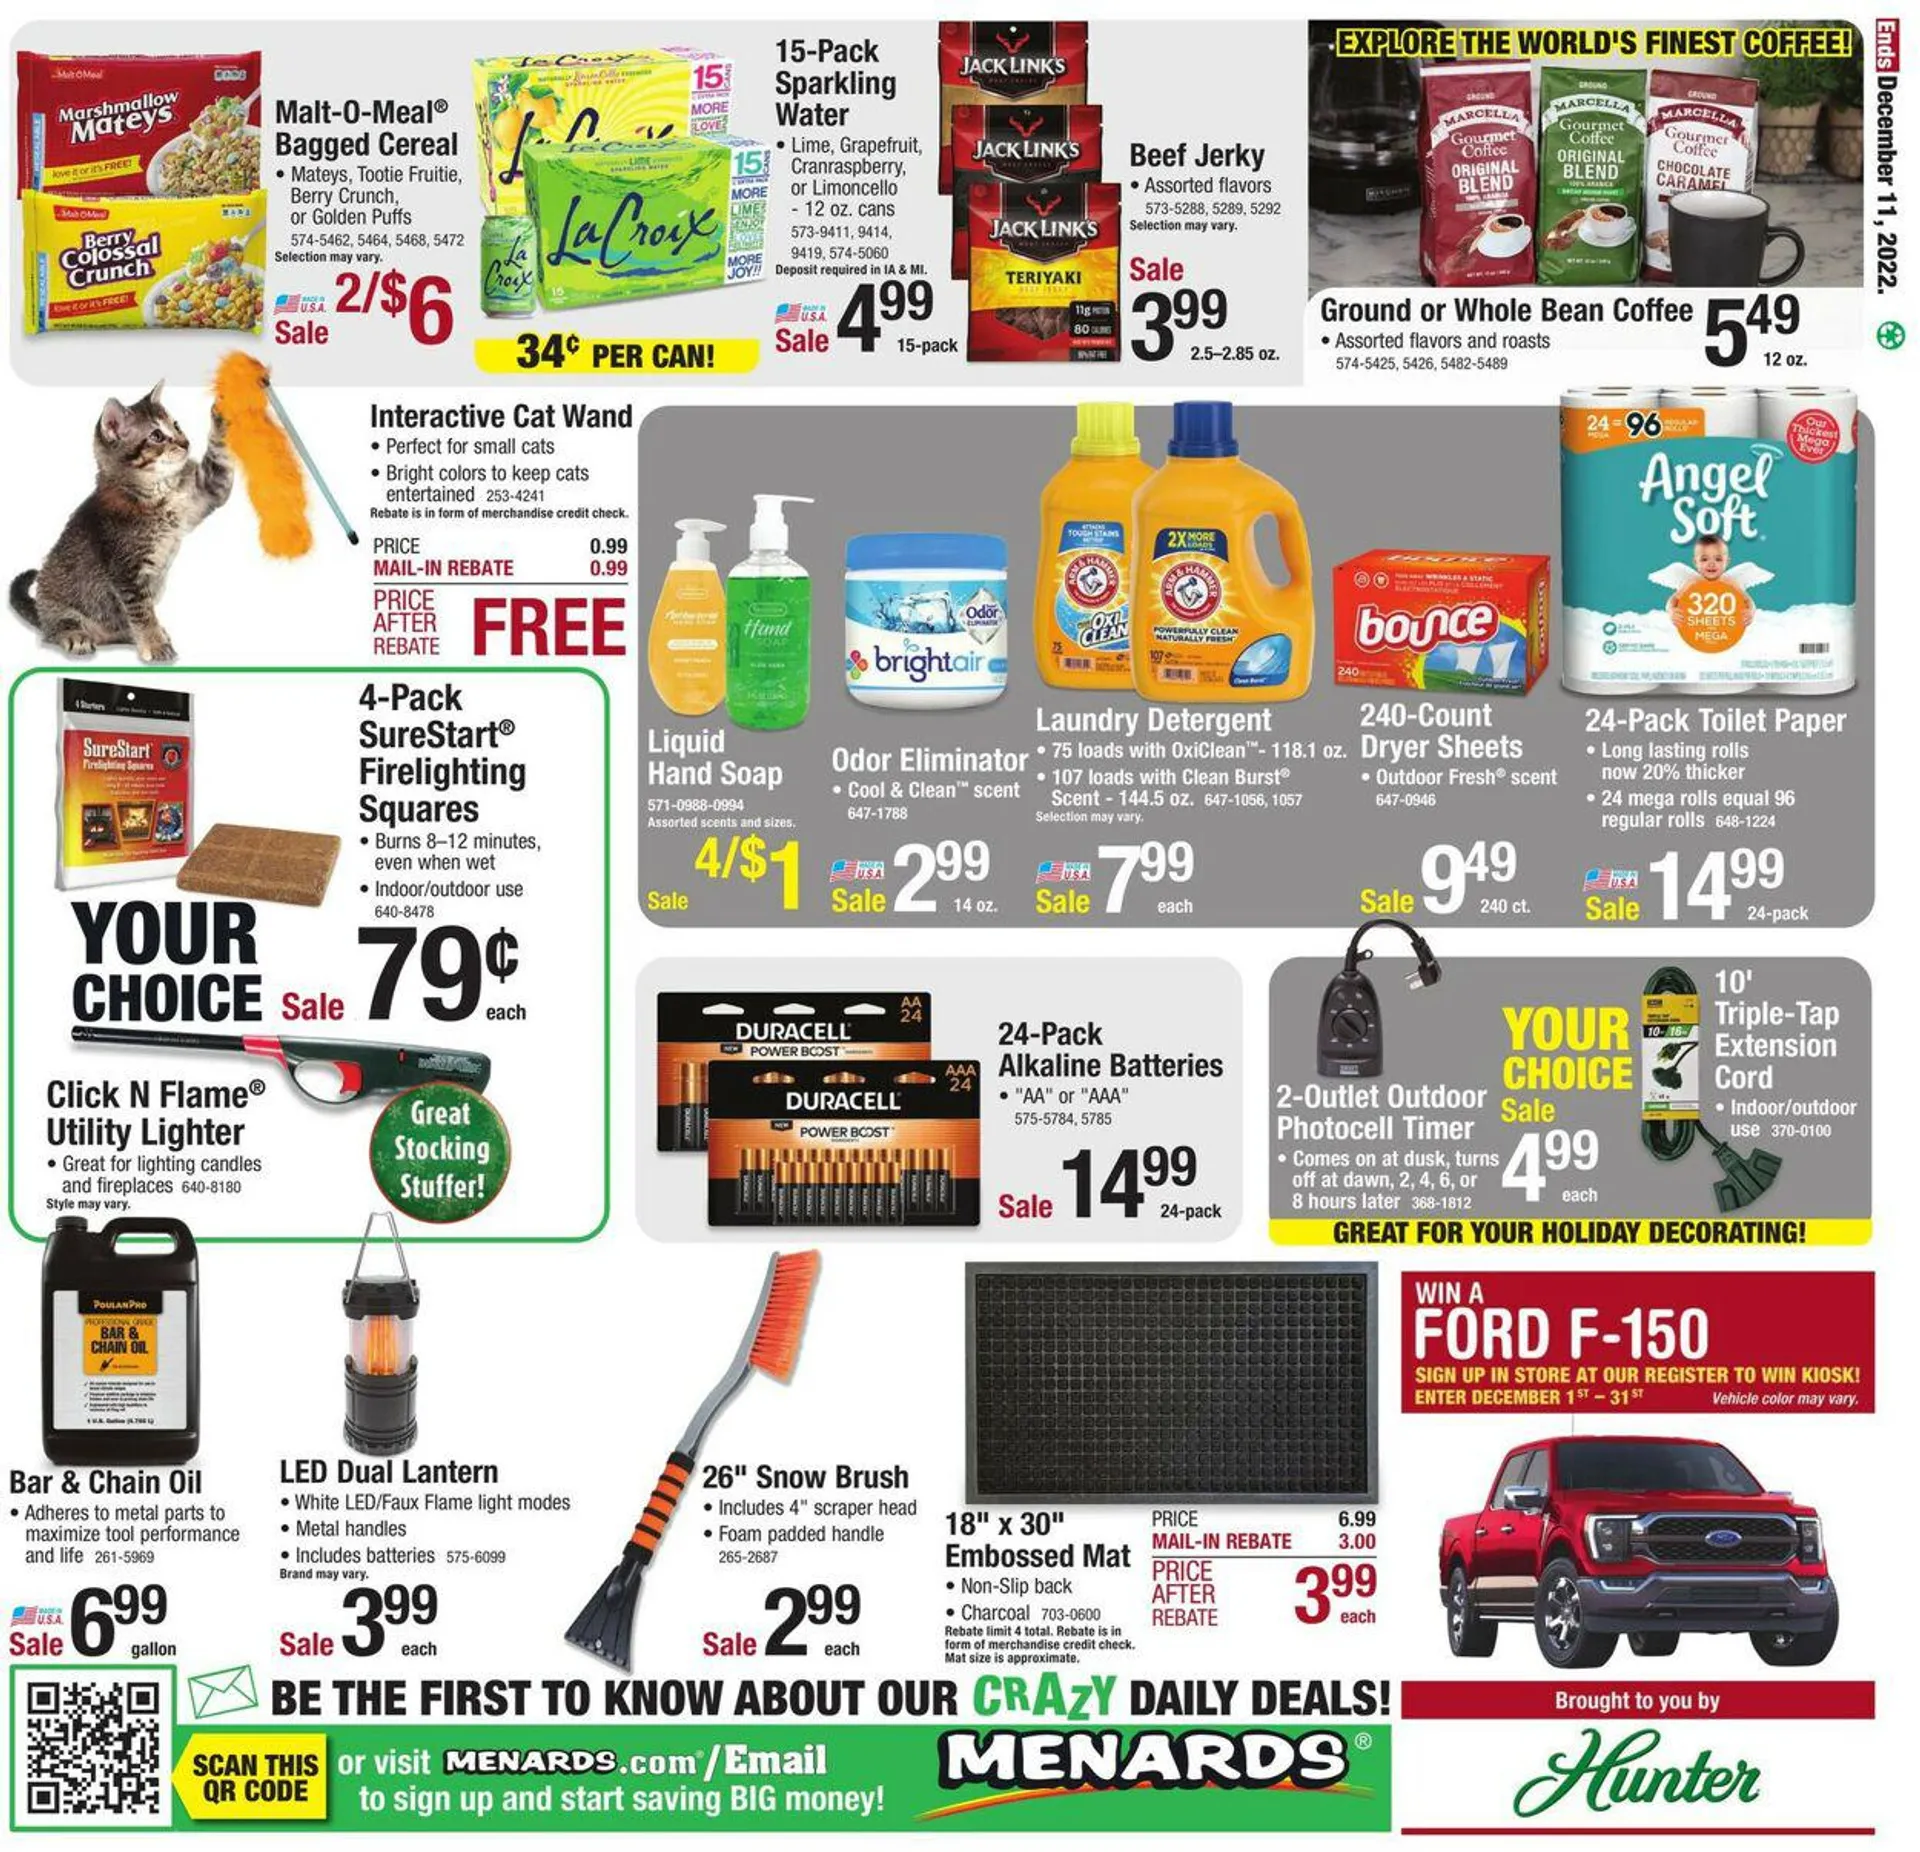 Menards Current weekly ad - 28